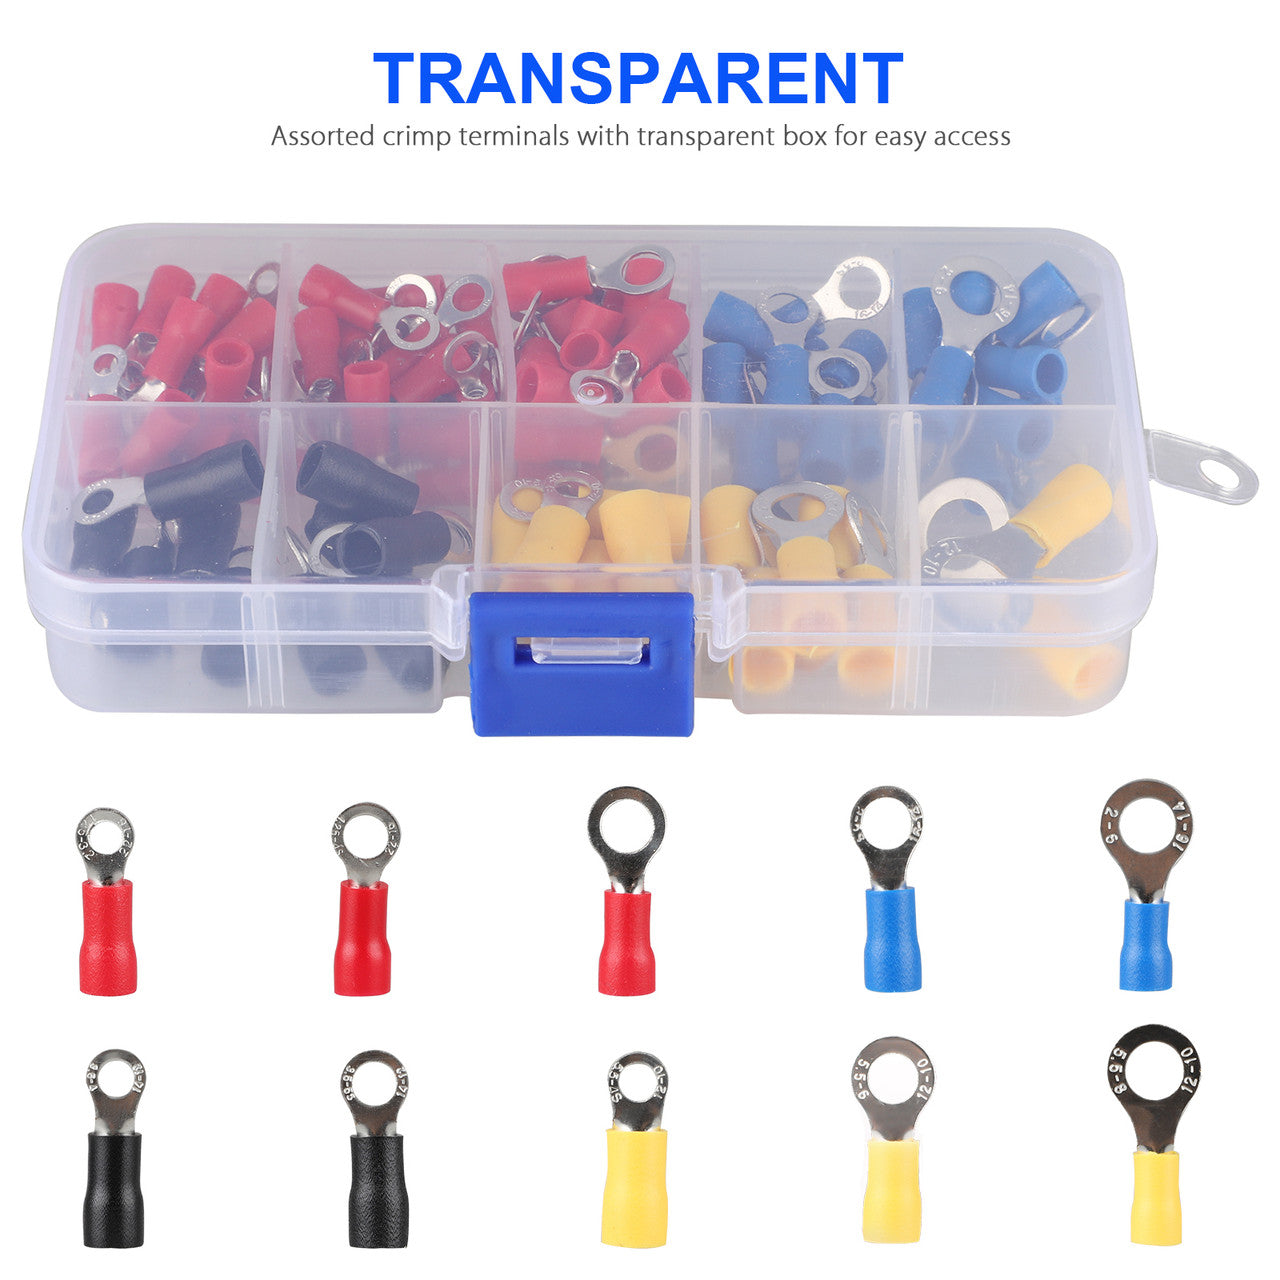 Heat Shrink Wire Connector Kit Electrical Insulated Crimp Marine Automotive Terminals Set, Ring Fork Hook Spade Butt Splices, 102 PCS